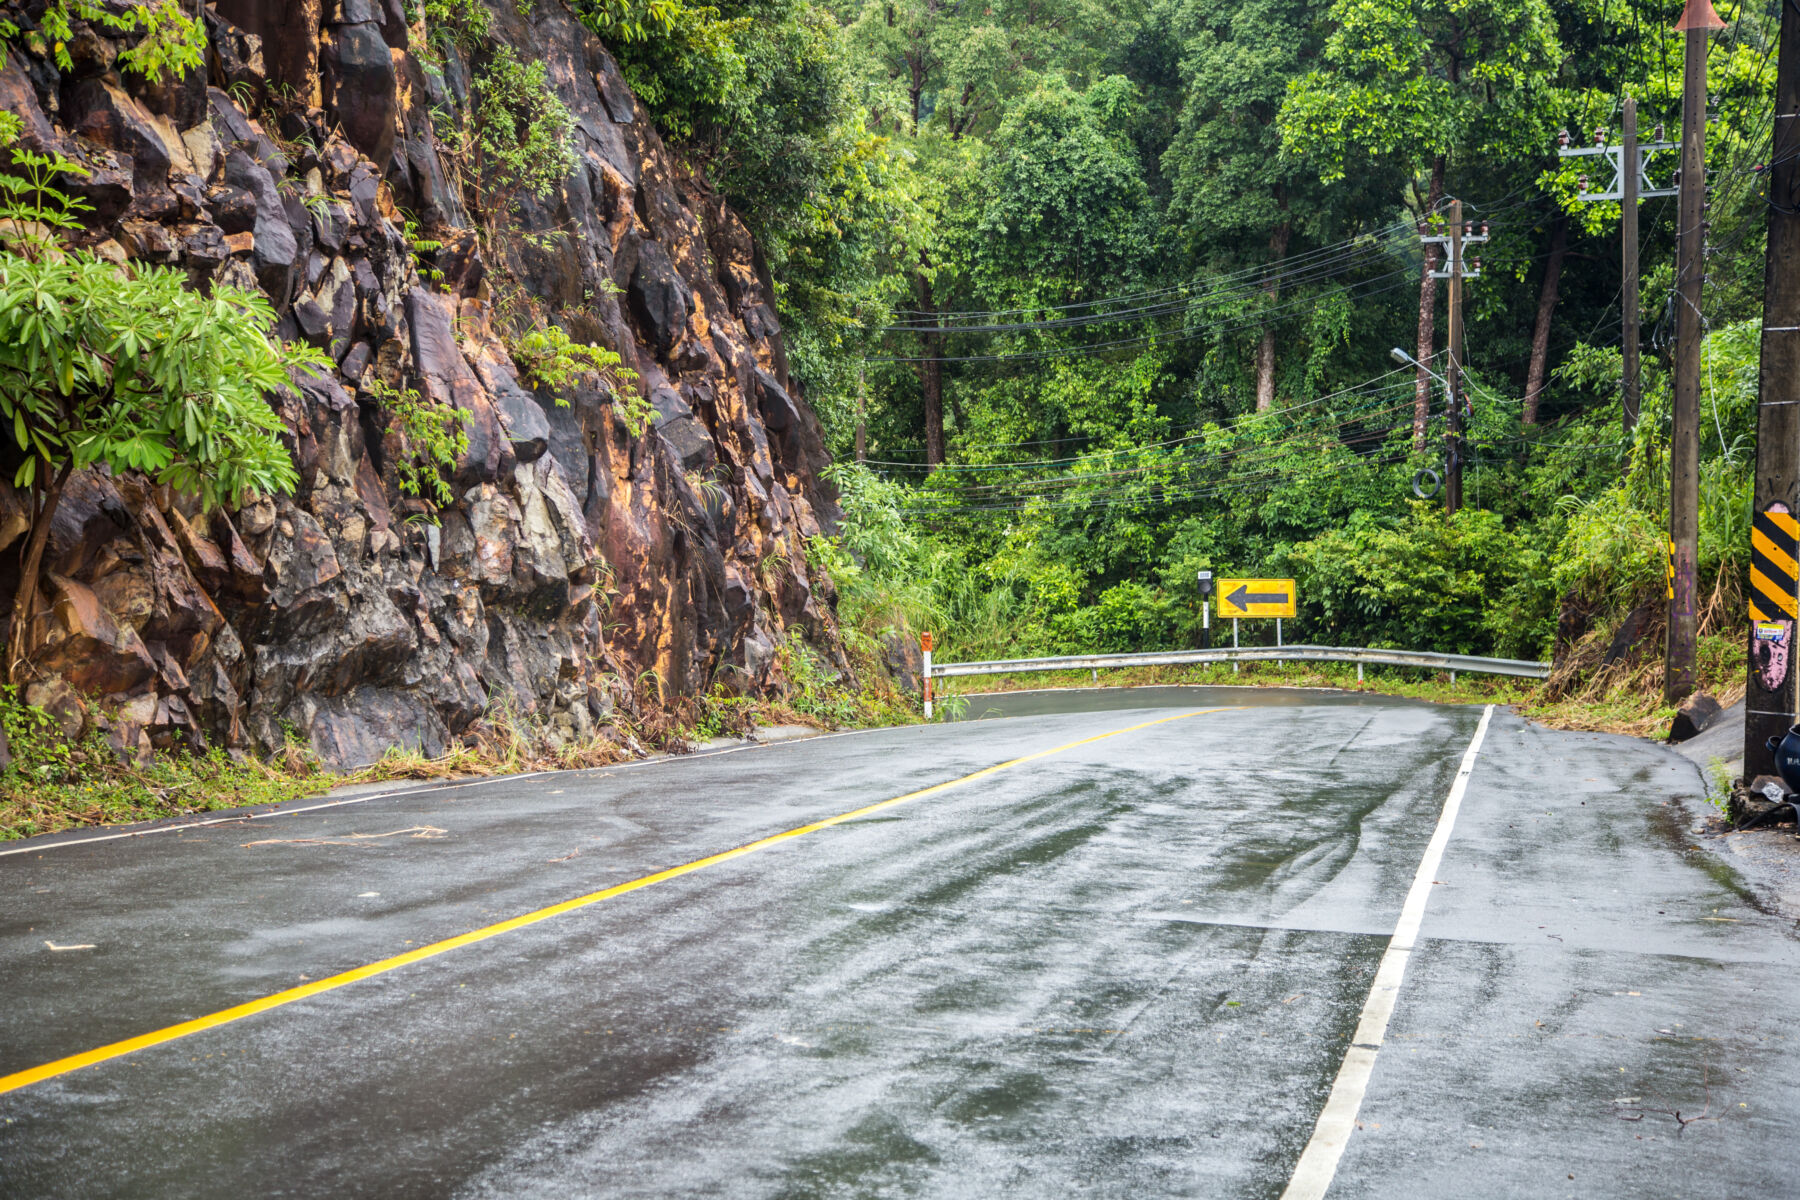 How Thai weather affects driving in Thailand | News by Thaiger